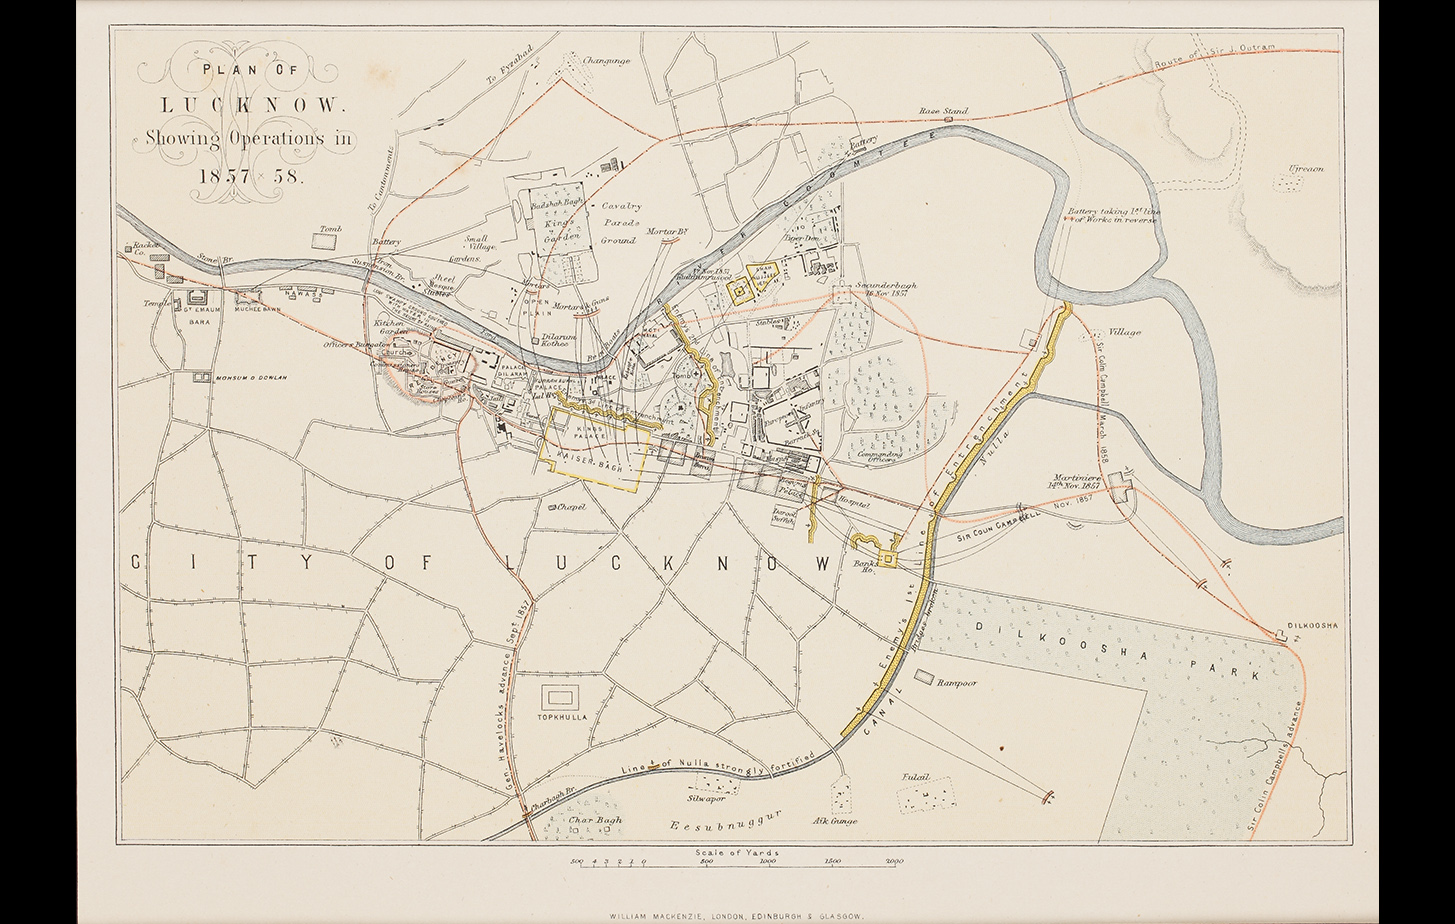 Plan of Lucknow Showing Operations in 1857-58 - Sarmaya